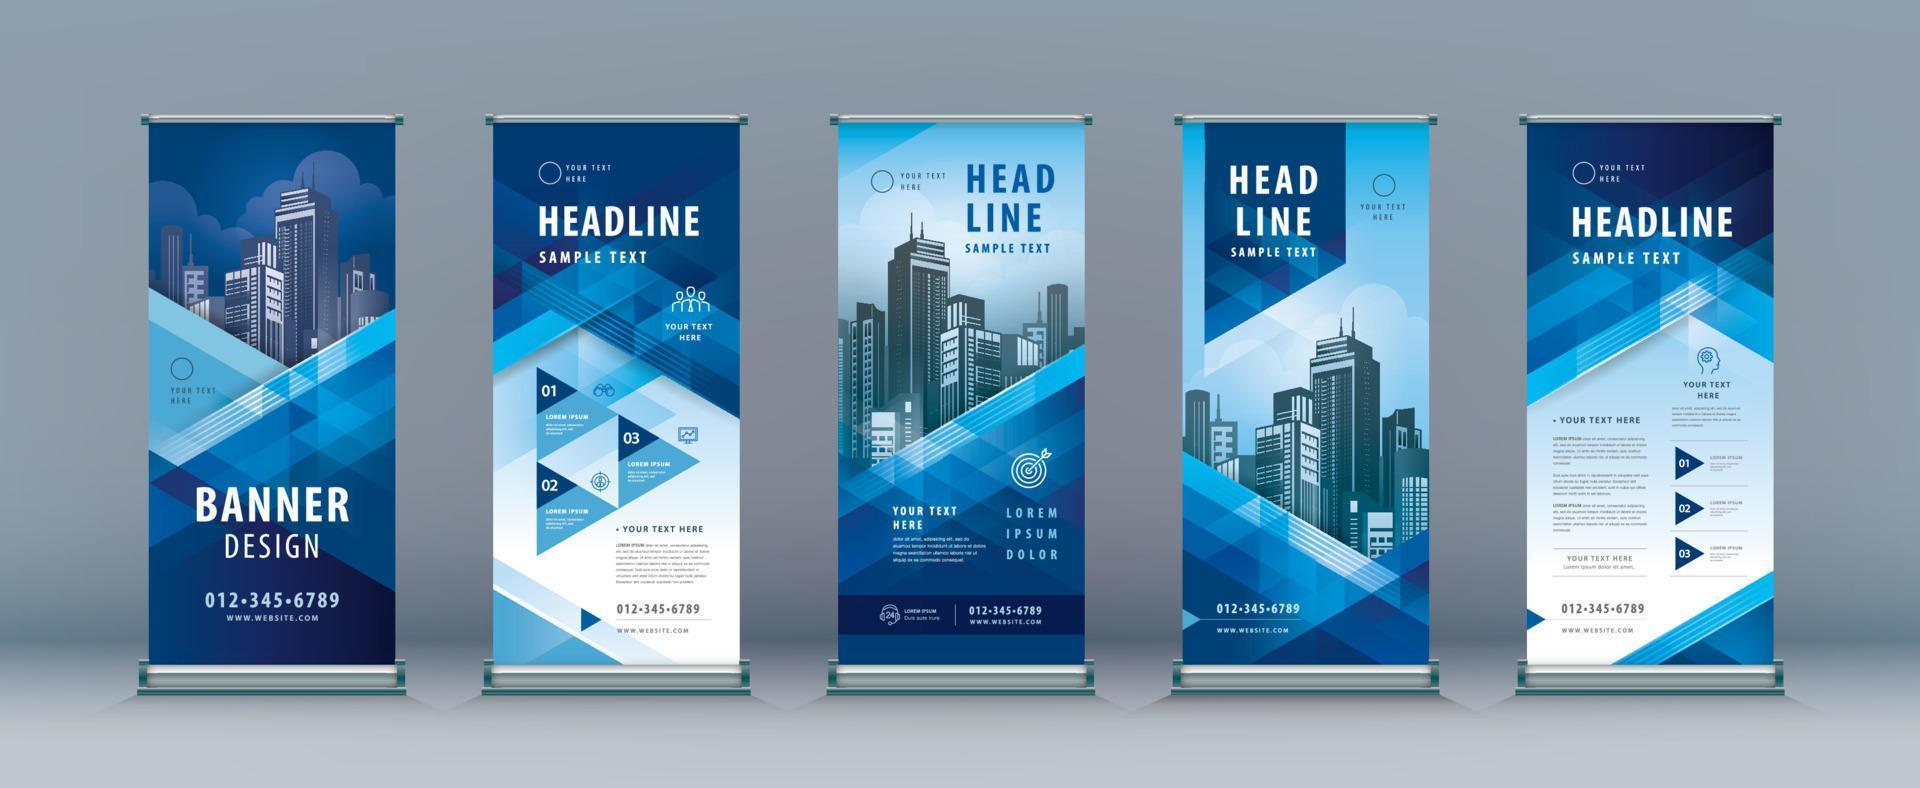 Standee Design. Banner Template, Business Roll Up Set. Abstract Blue Geometric Triangle Background vector